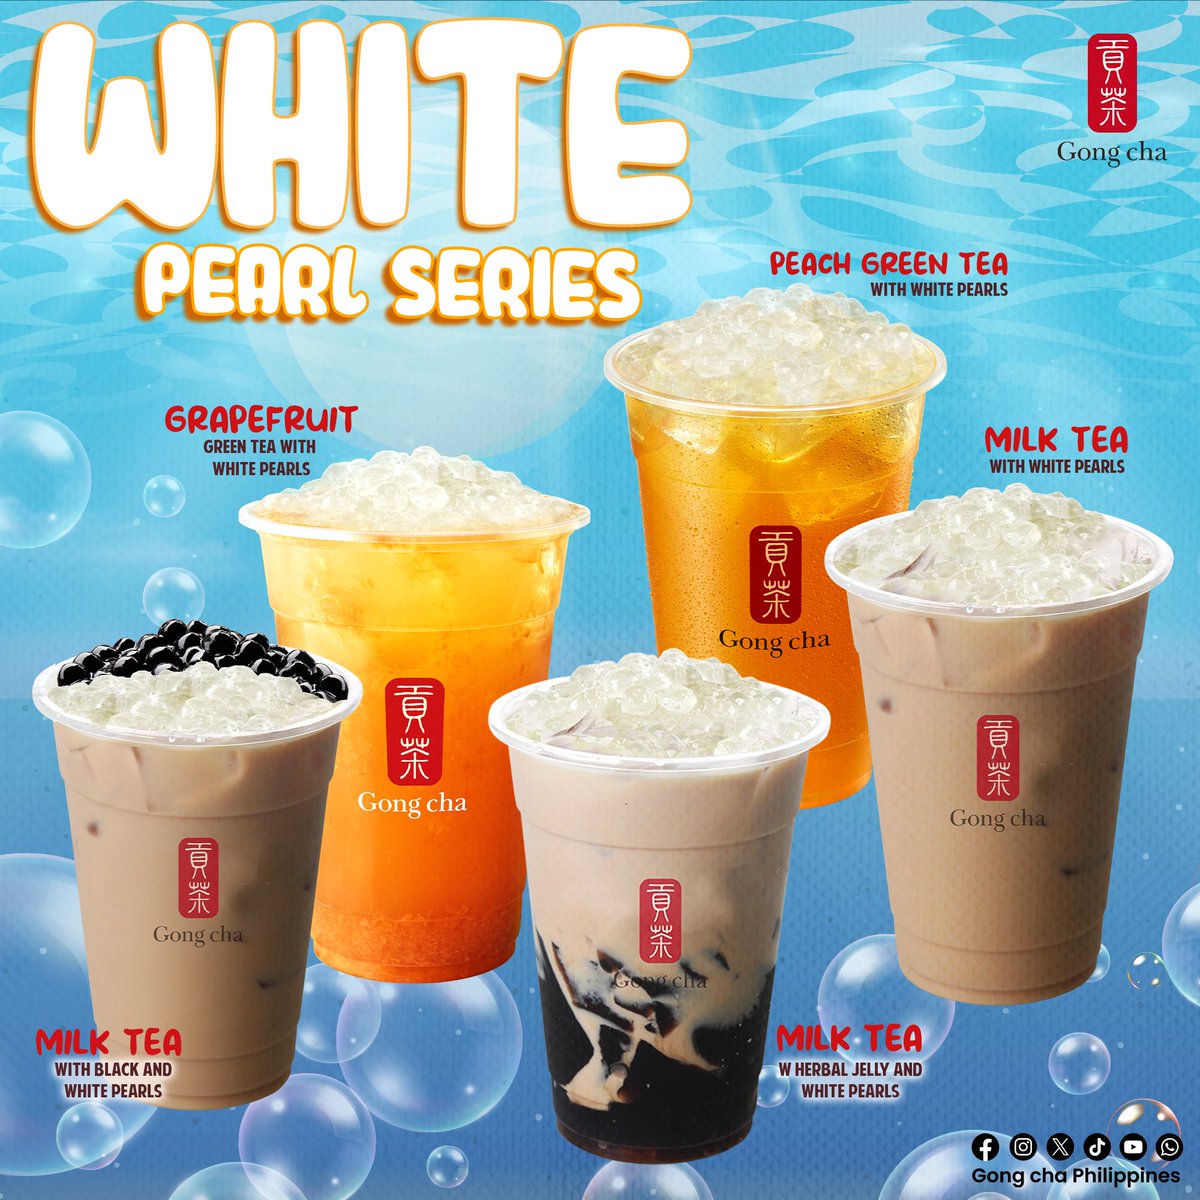 Exciting news! Gong cha now offers a new extra option - 𝗪𝗵𝗶𝘁𝗲 𝗣𝗲𝗮𝗿𝗹𝘀! These delightful pearls add a creamy and smooth texture to your favorite drinks, enhancing your Gong cha experience. Come and try them out today! 📍Fiesta Carnival Arcade #CityOfFirsts #AranetaCity